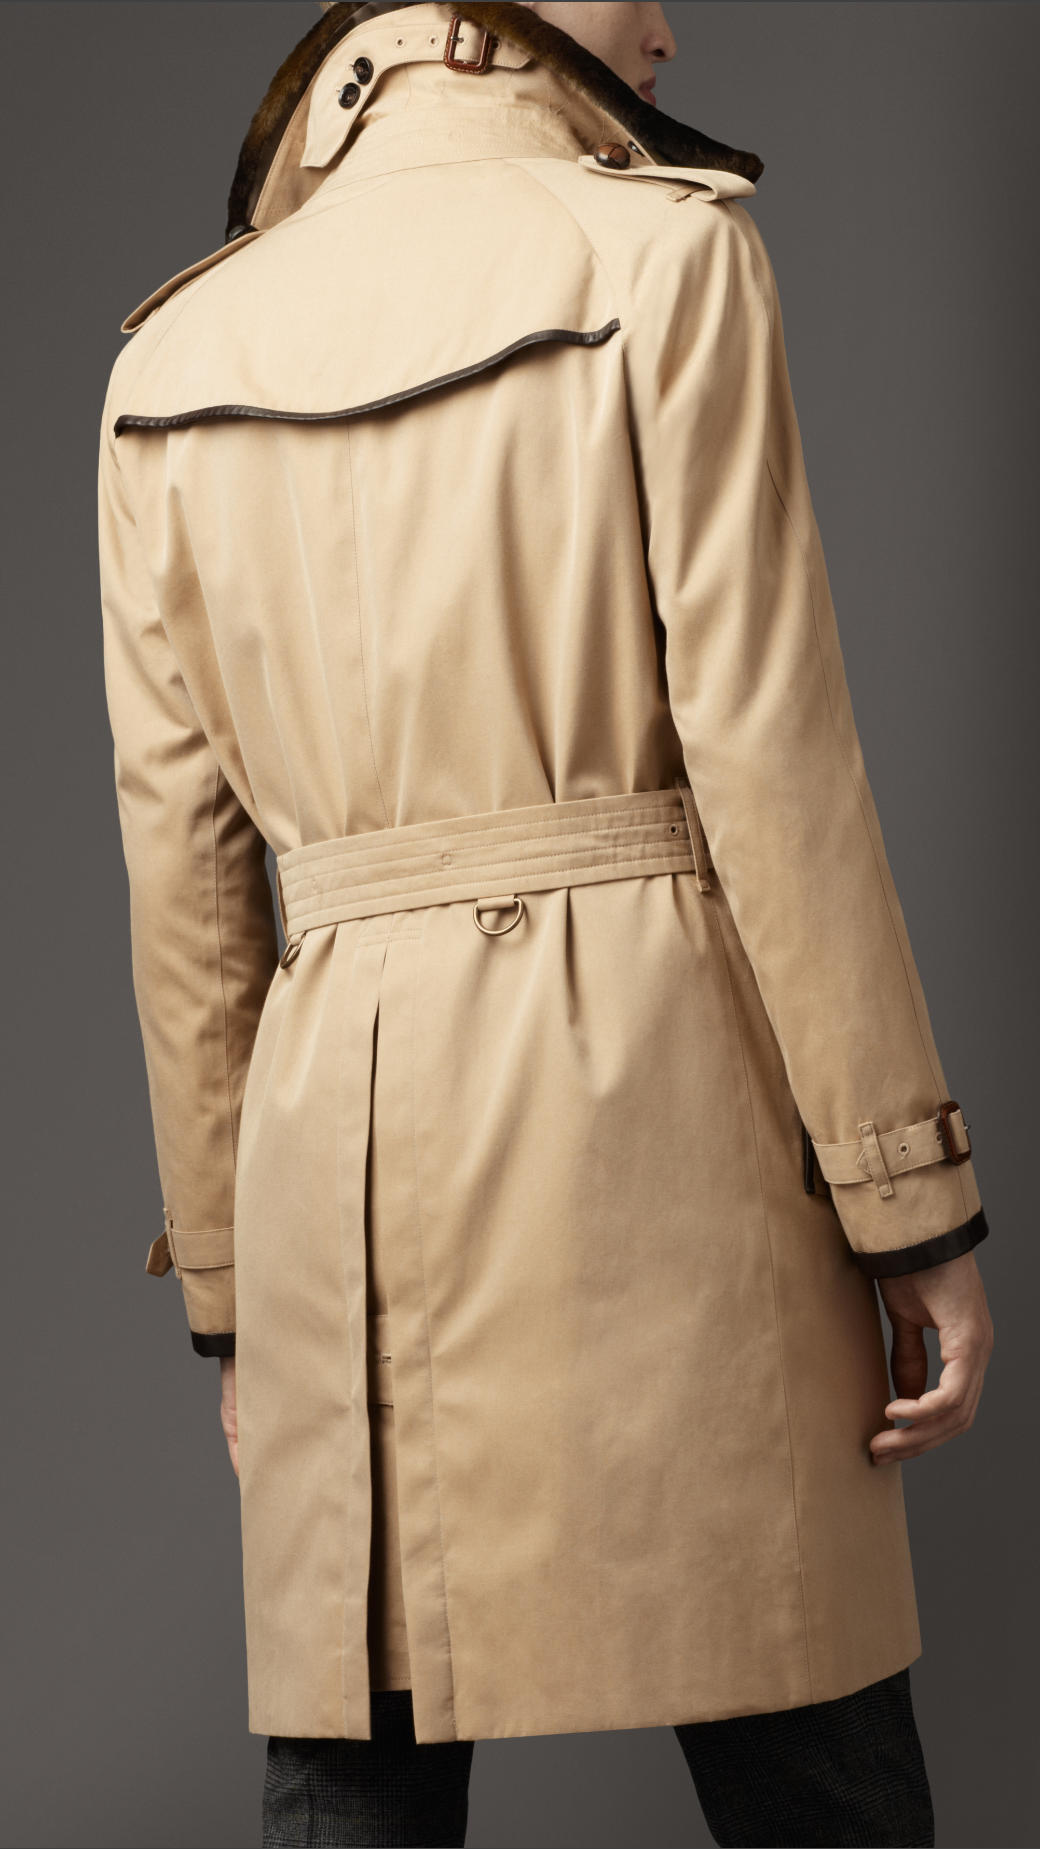 Lyst - Burberry Long Fur Collar Cotton Trench Coat in Natural for Men